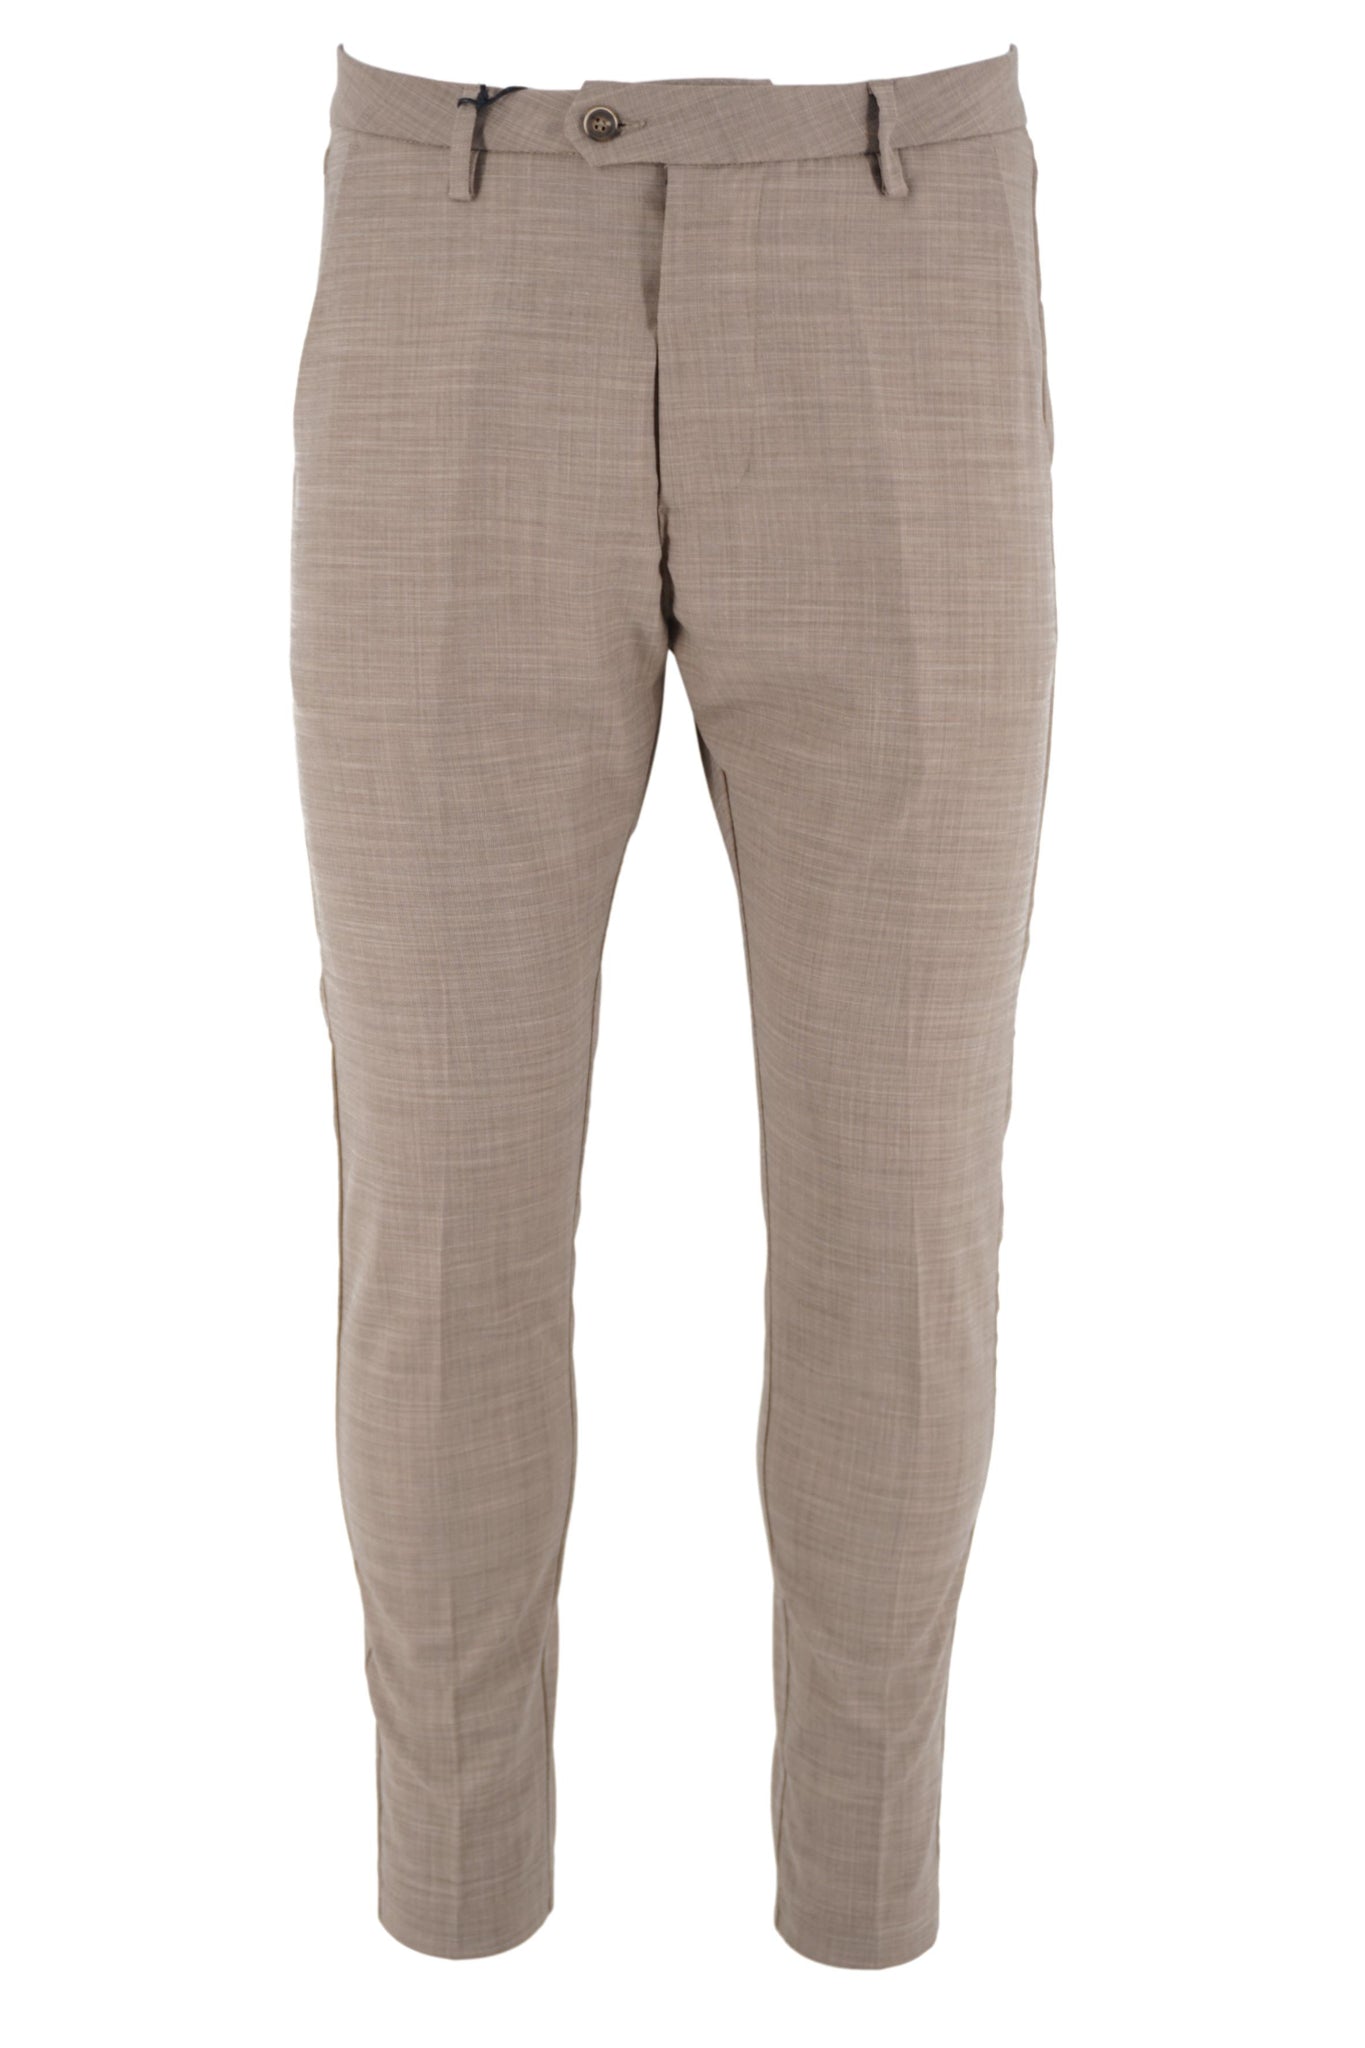 Buy Monte Carlo Men's Regular Fit Cotton Trousers  (2220861246CF-1-32_White_M) at Amazon.in